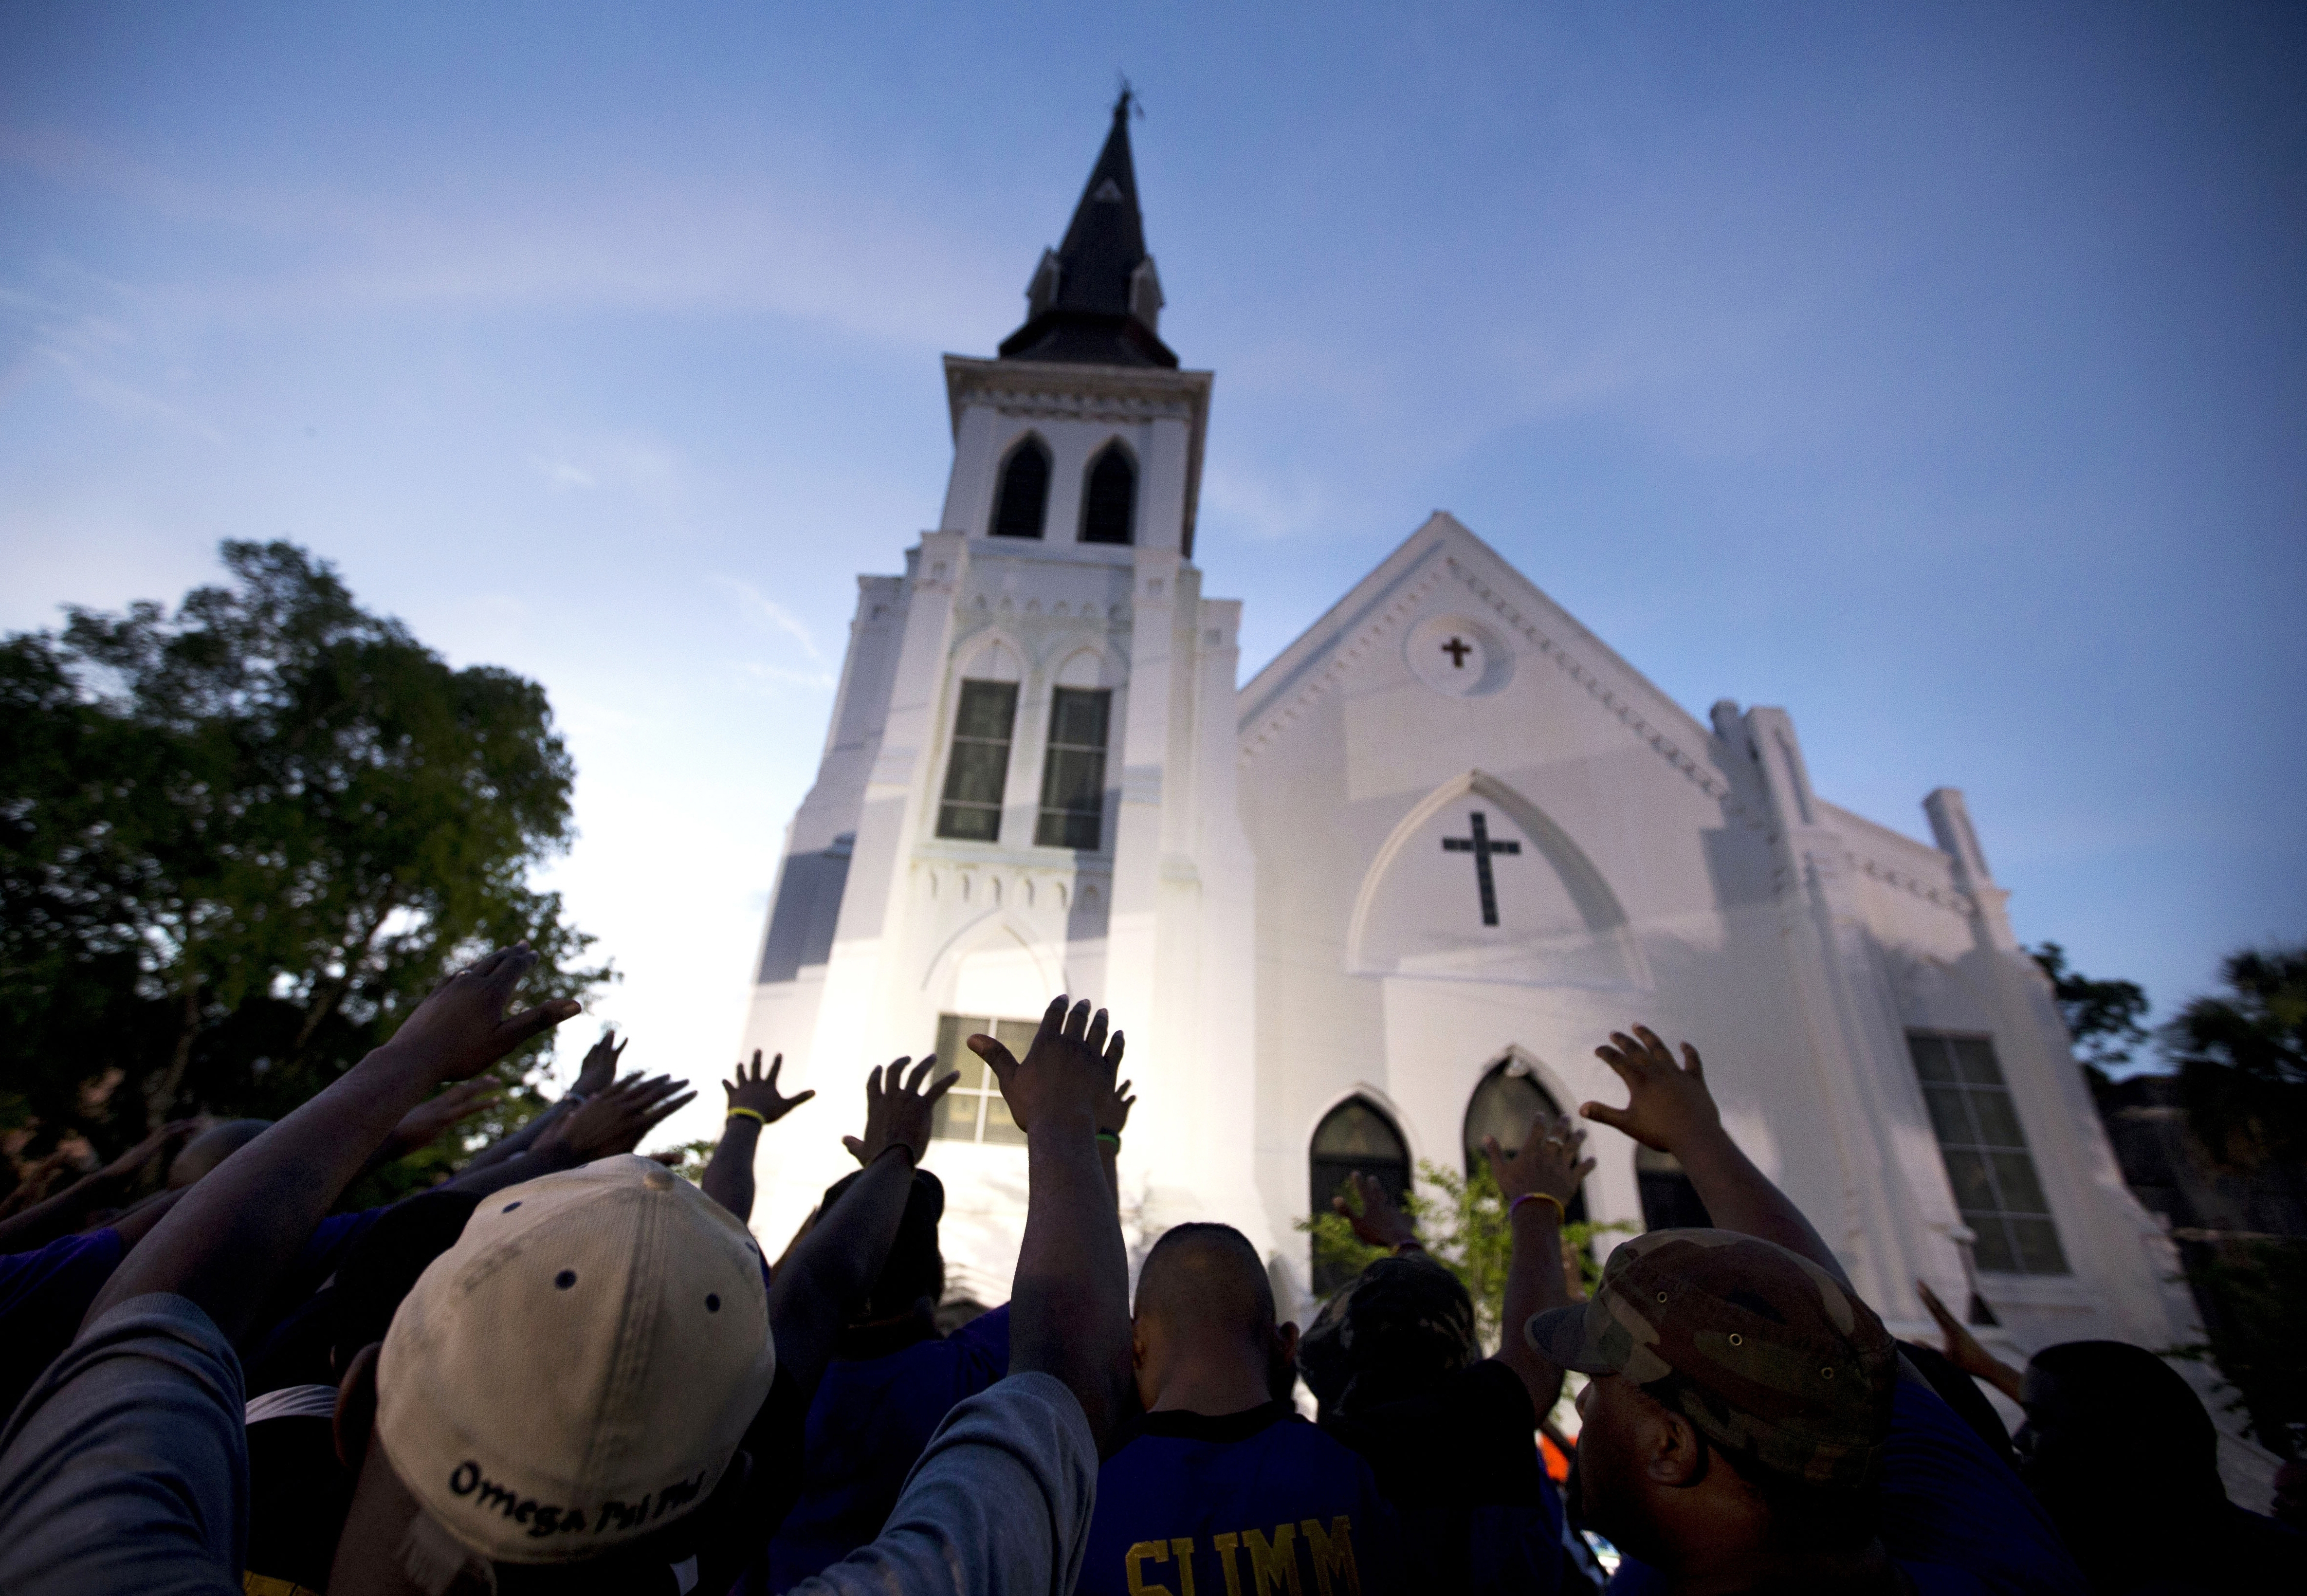 
A crowd prays outside of the Emanuel AME Church in Charleston, South Carolina after a memorial service for the nine people killed by white supremacist Dylann Roof. The Post and Courier’s newsroom discussions about the implications of implicit bias likely played a role in their coverage decisions about the mass shooting